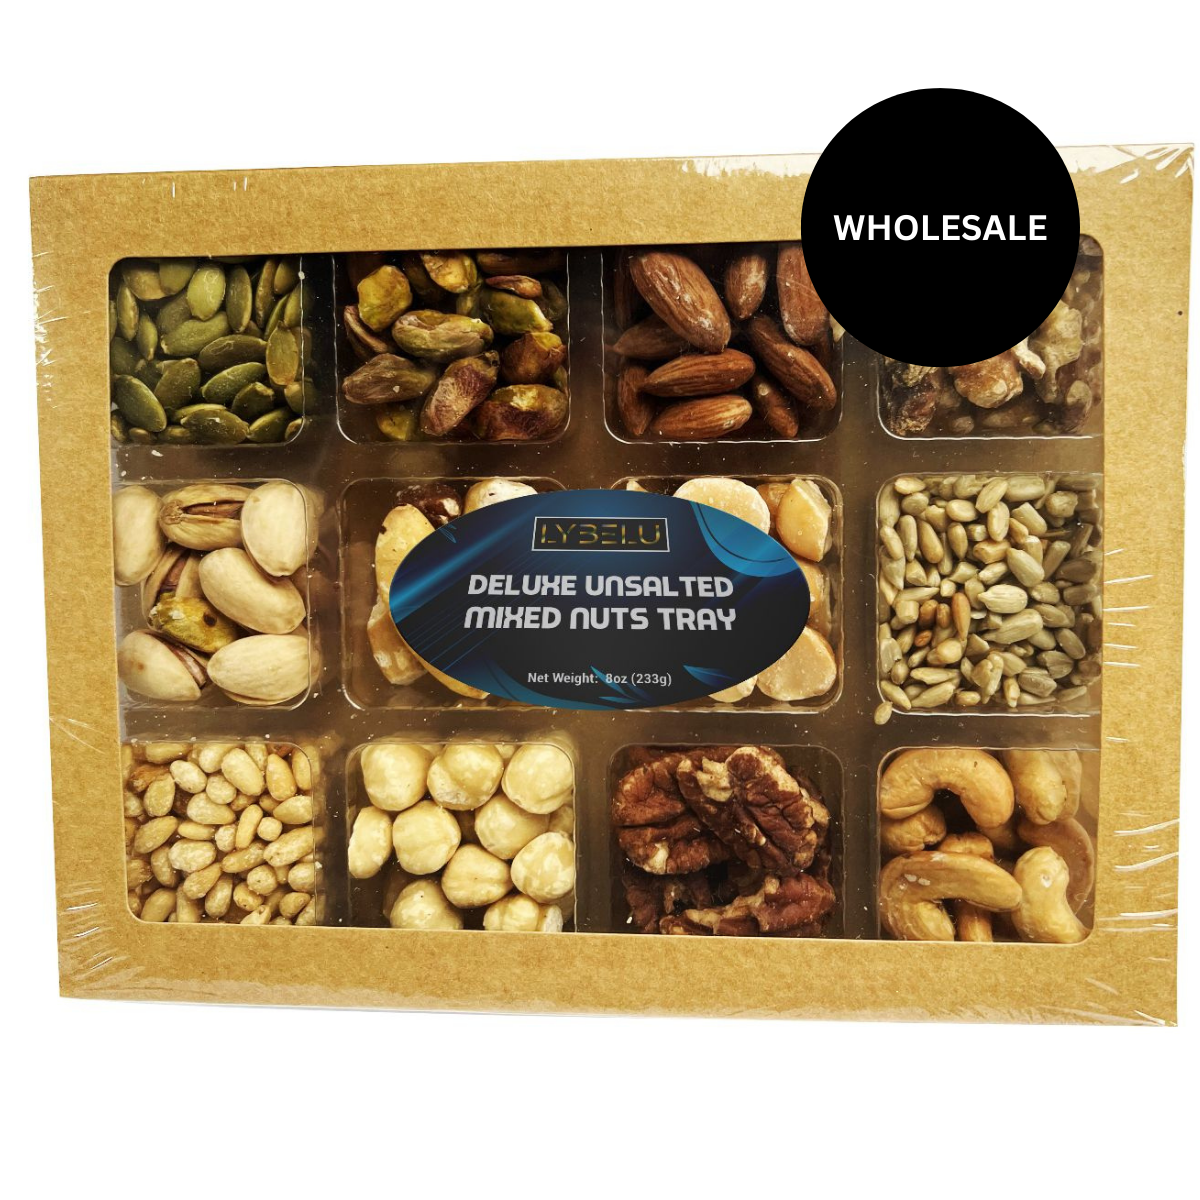 Deluxe Unsalted Mixed Nuts Tray 12 Cavity – 8oz